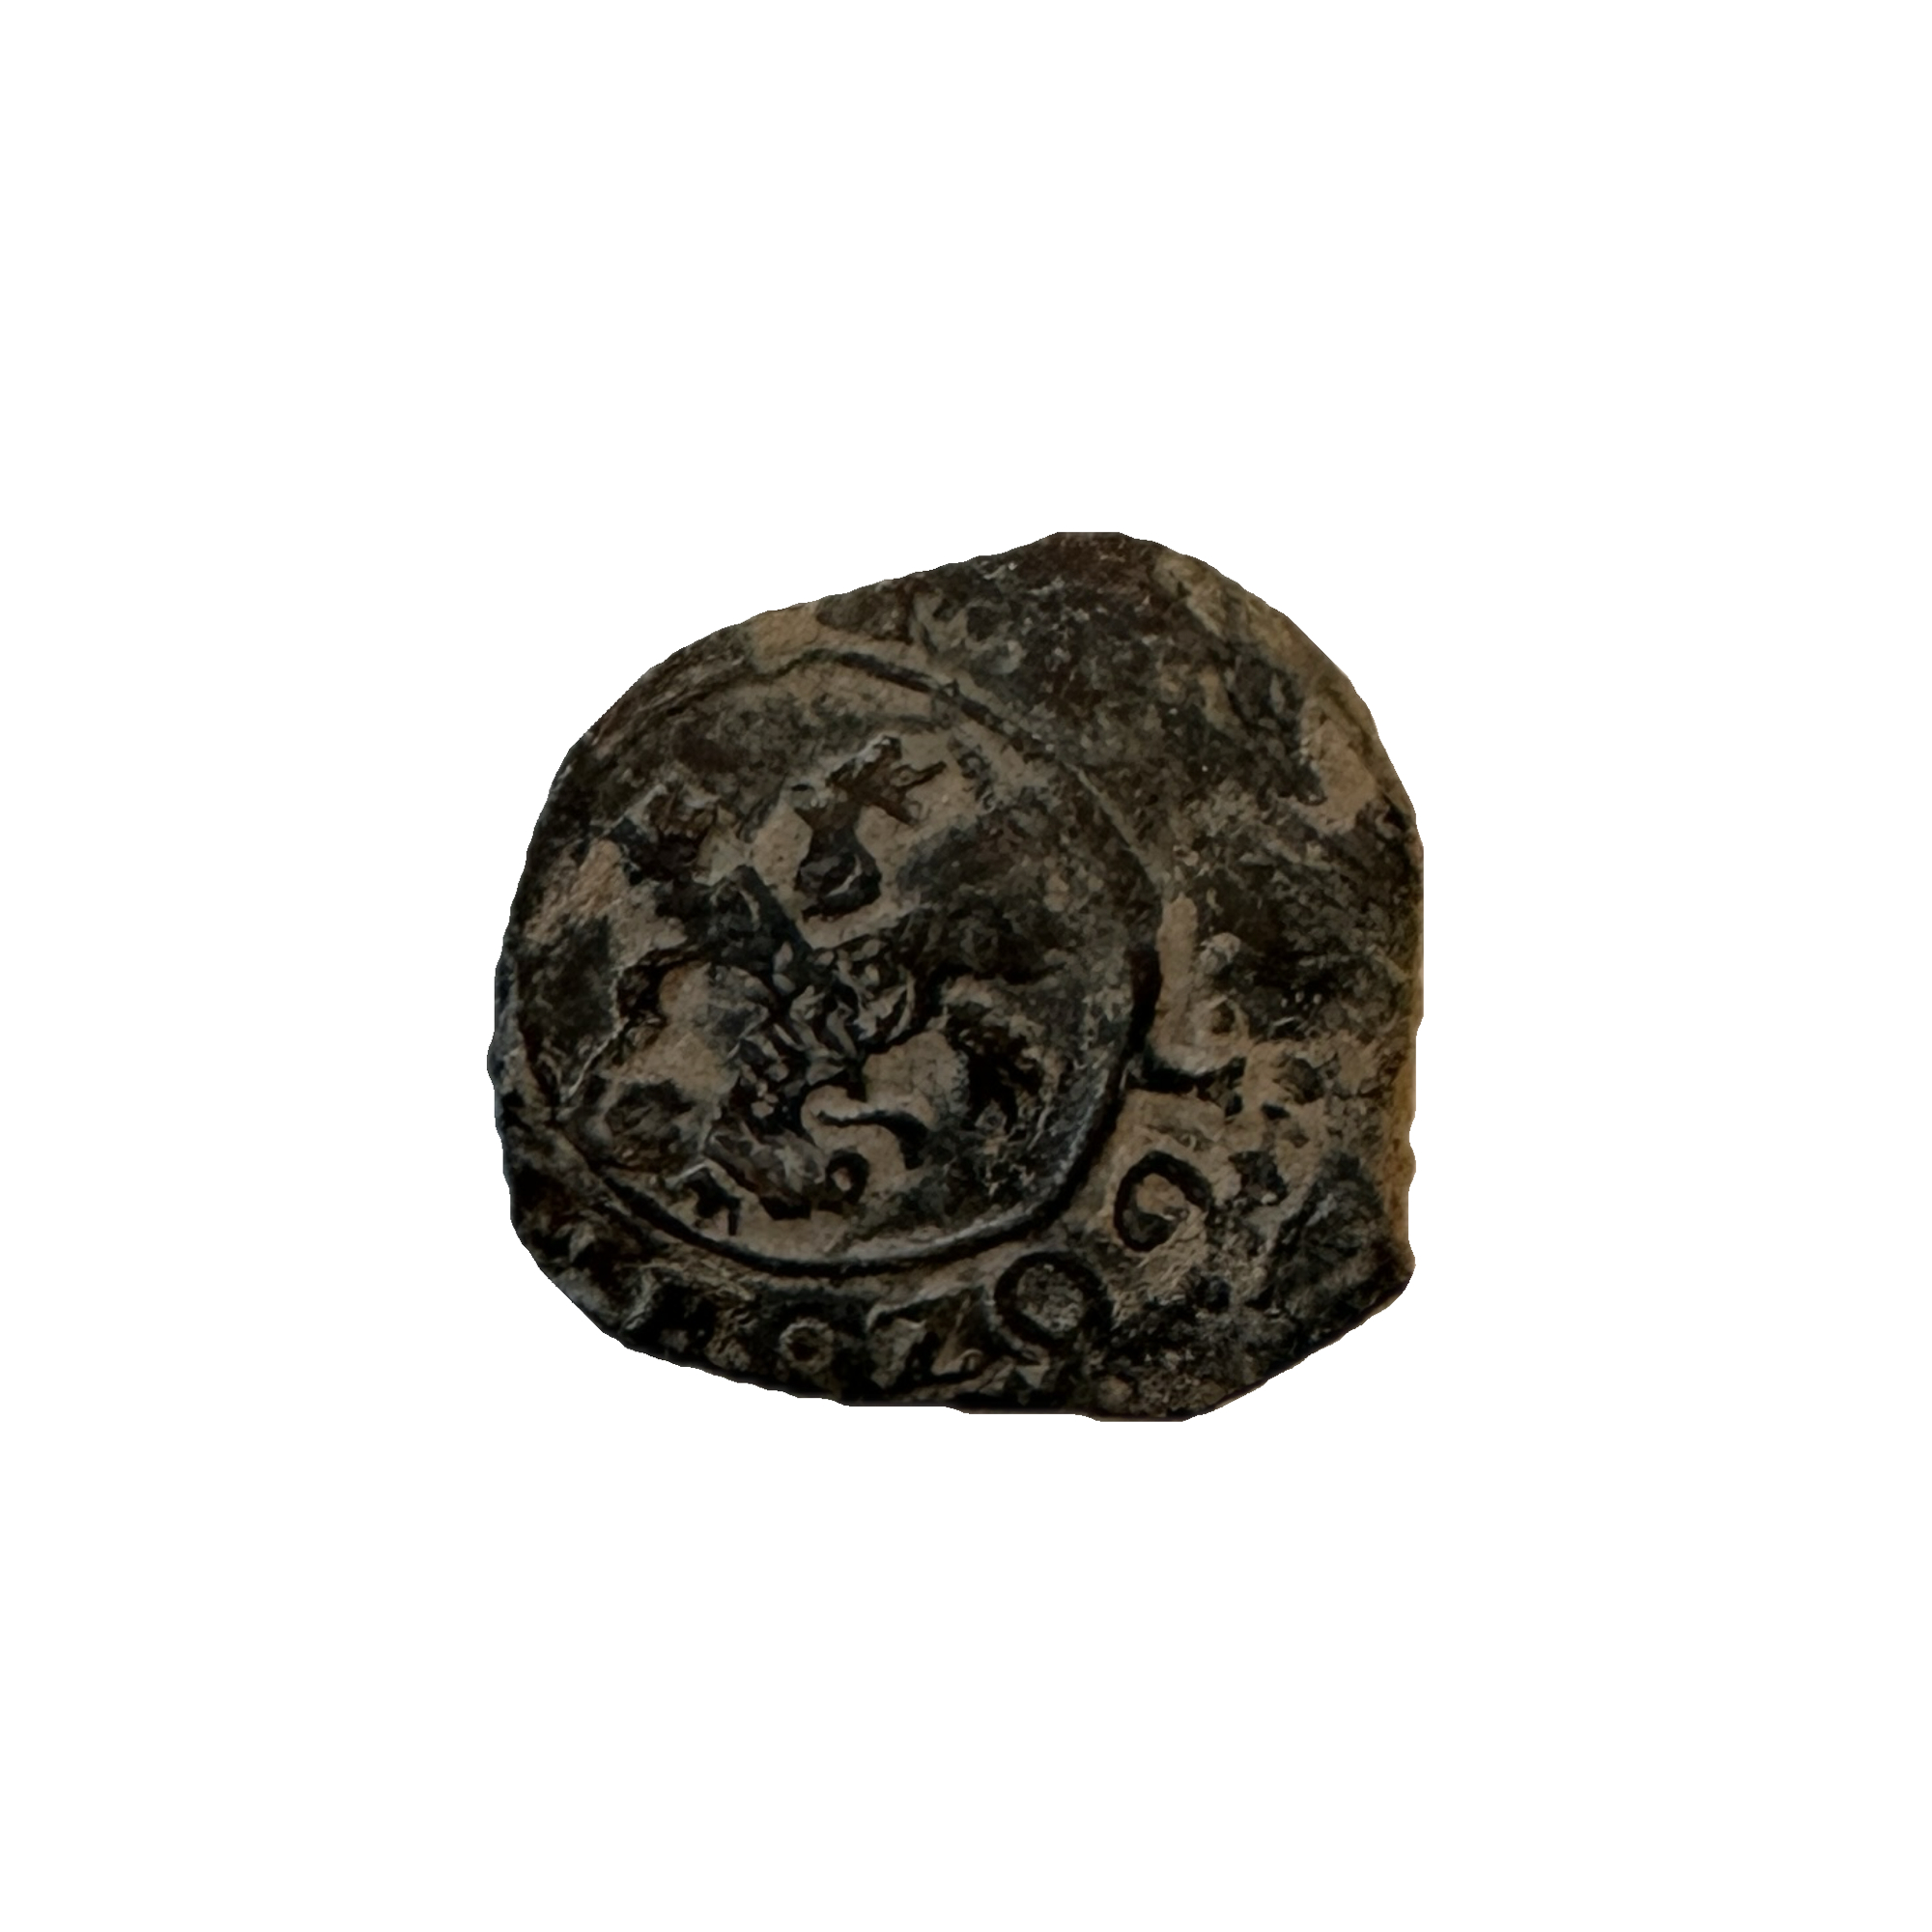 This beautiful pirate coin from Spain was hand hammered which is shown in its very unique shape. The detail is very intricate and recognizable. The cob was hand hammered in the 1600s.